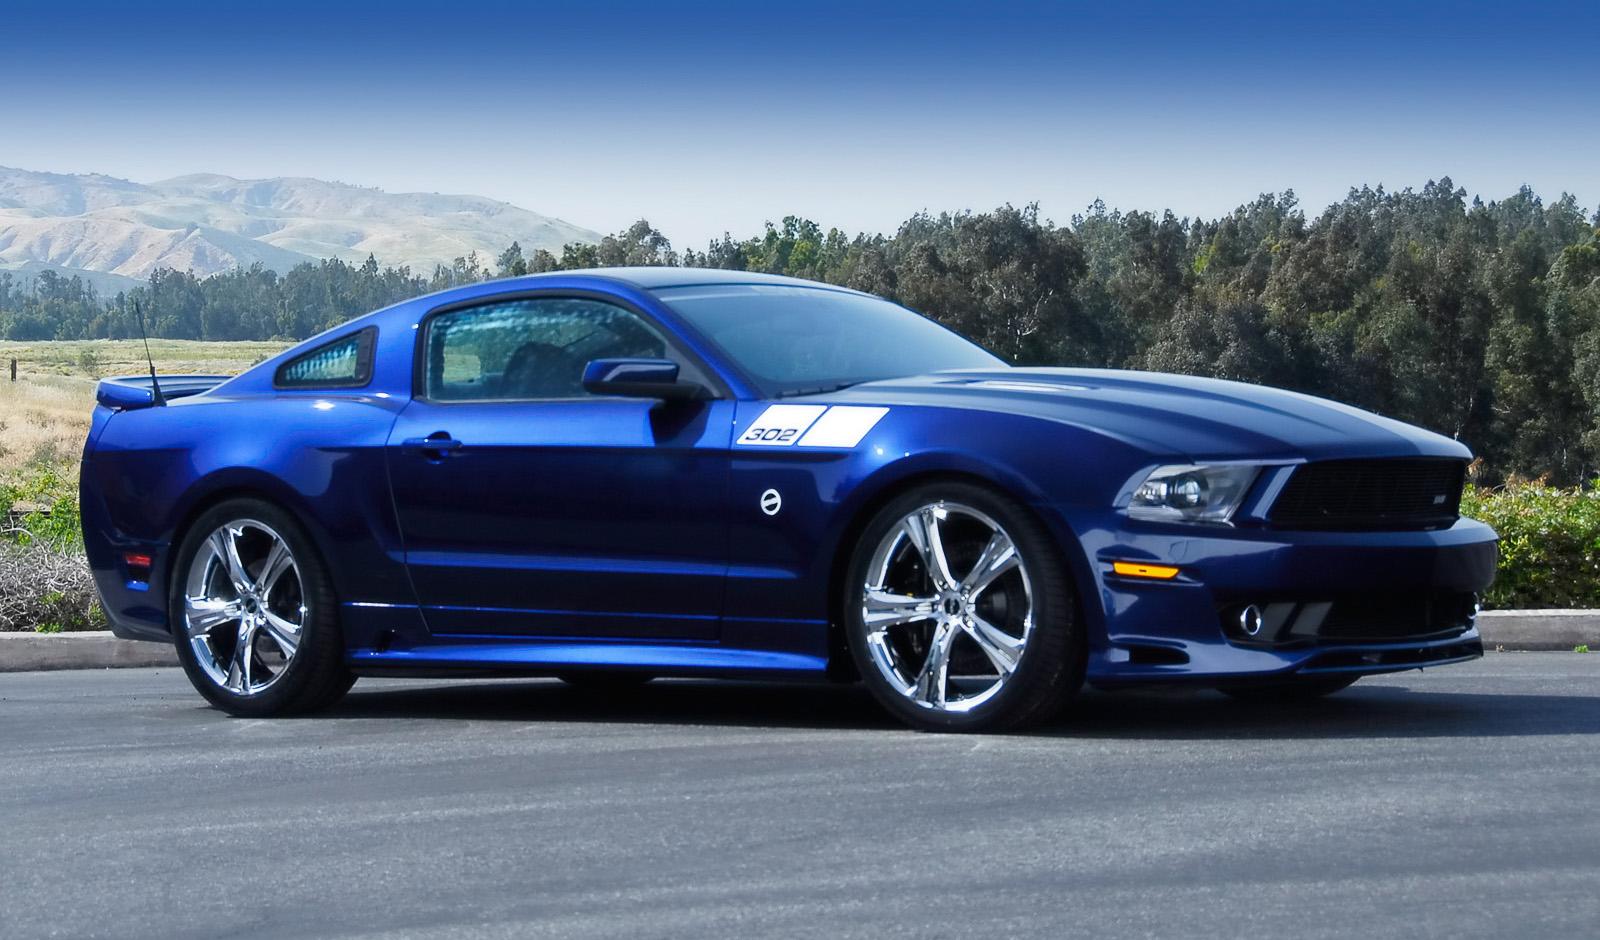 Mustang Of The Day: 2011 SMS Mustang 302 SC